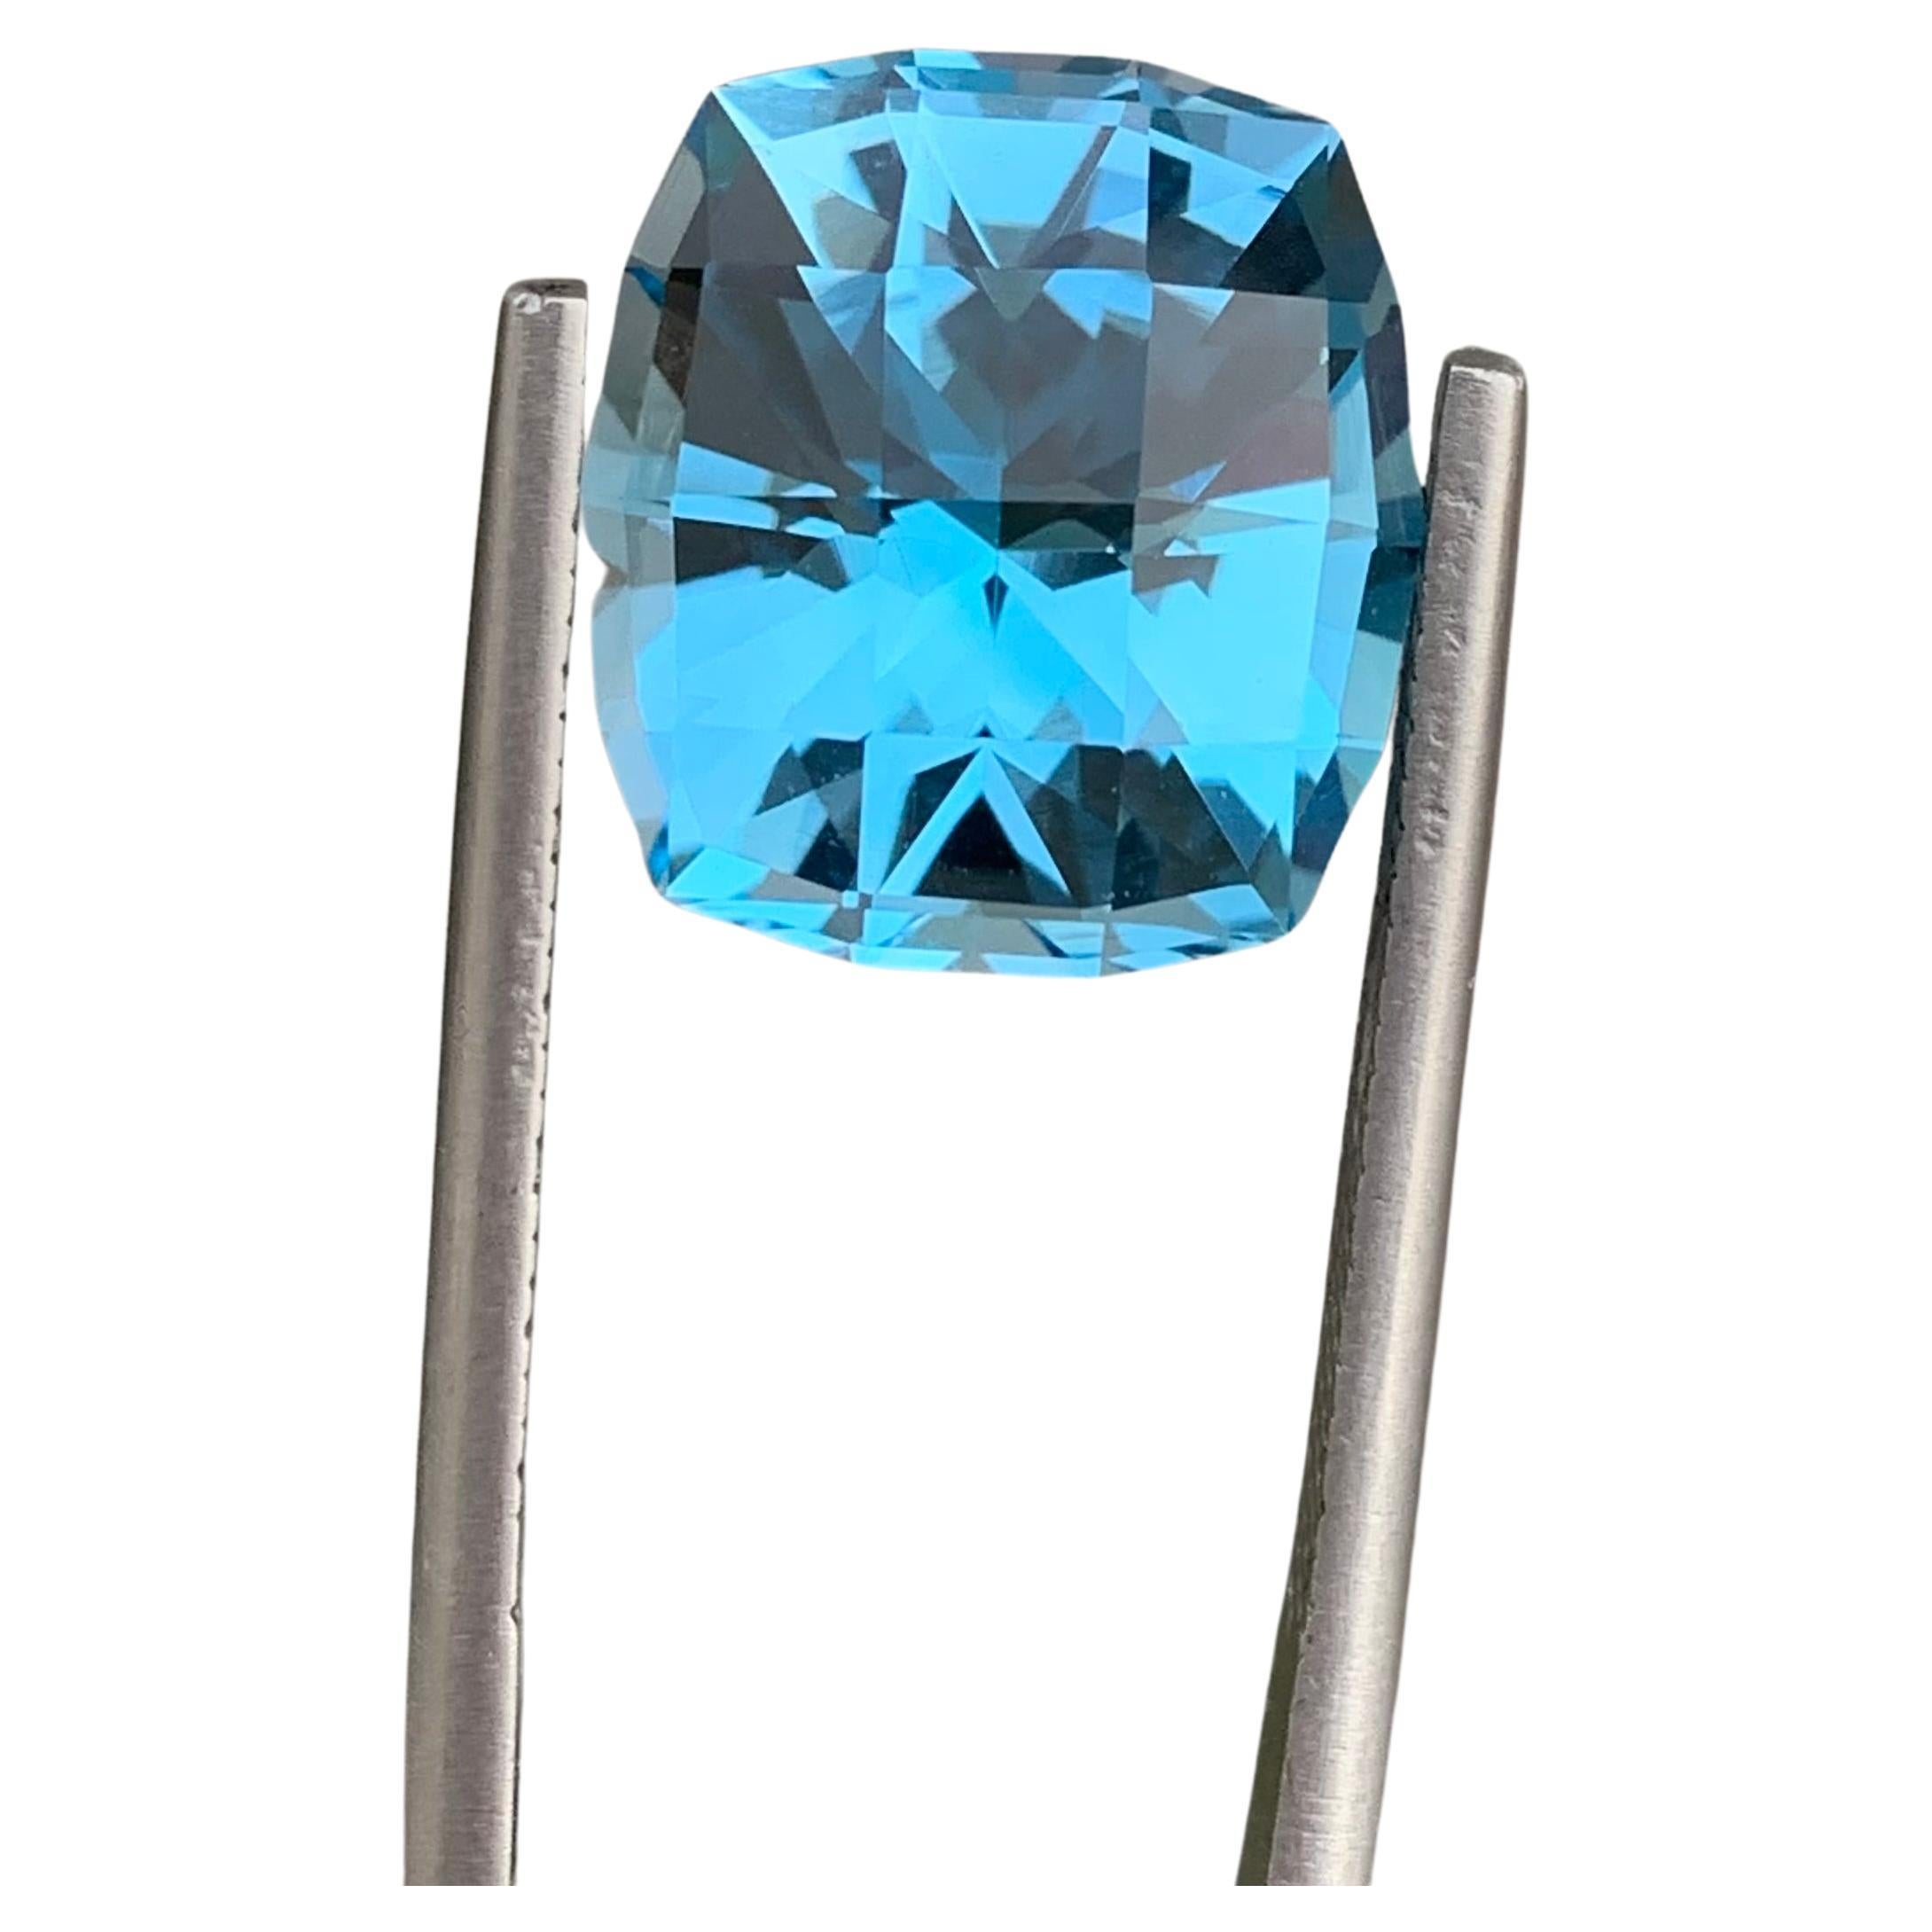 12.15 Carat Fancy Cut Faceted Sky Blue Topaz Gemstone For Jewellery Making  For Sale